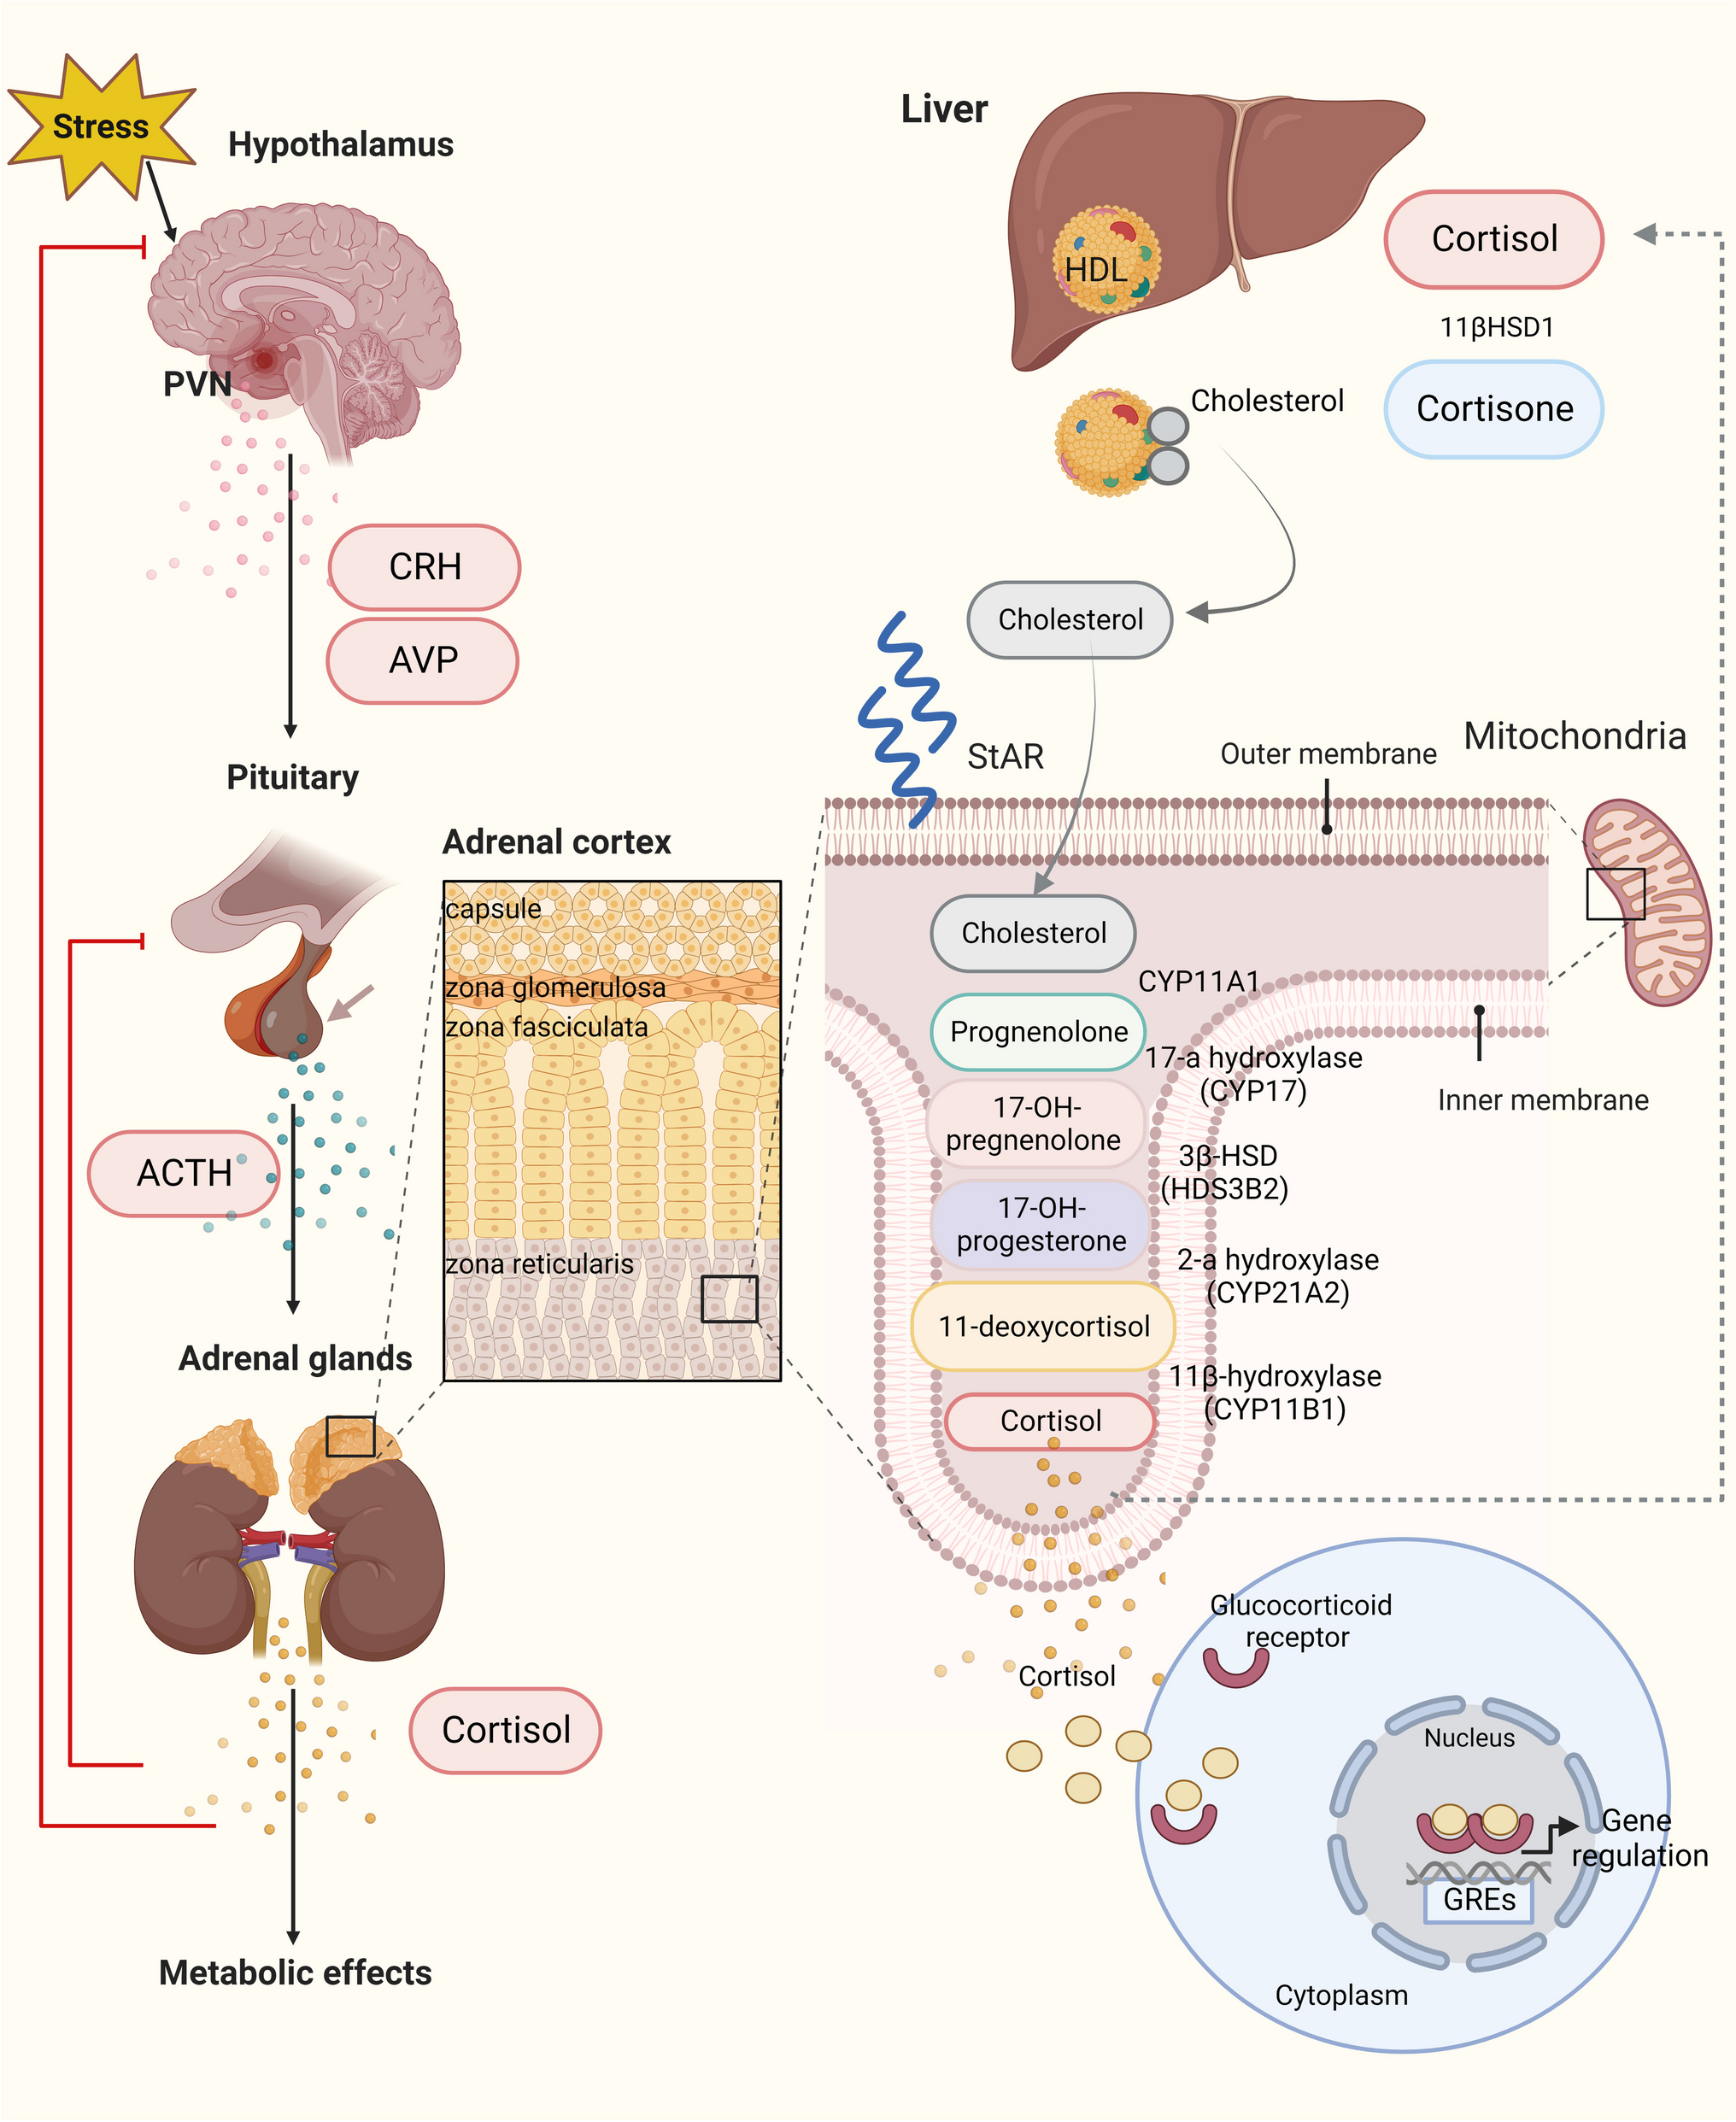 Adrenal insufficiency in liver diseases - pathophysiology and underlying mechanisms